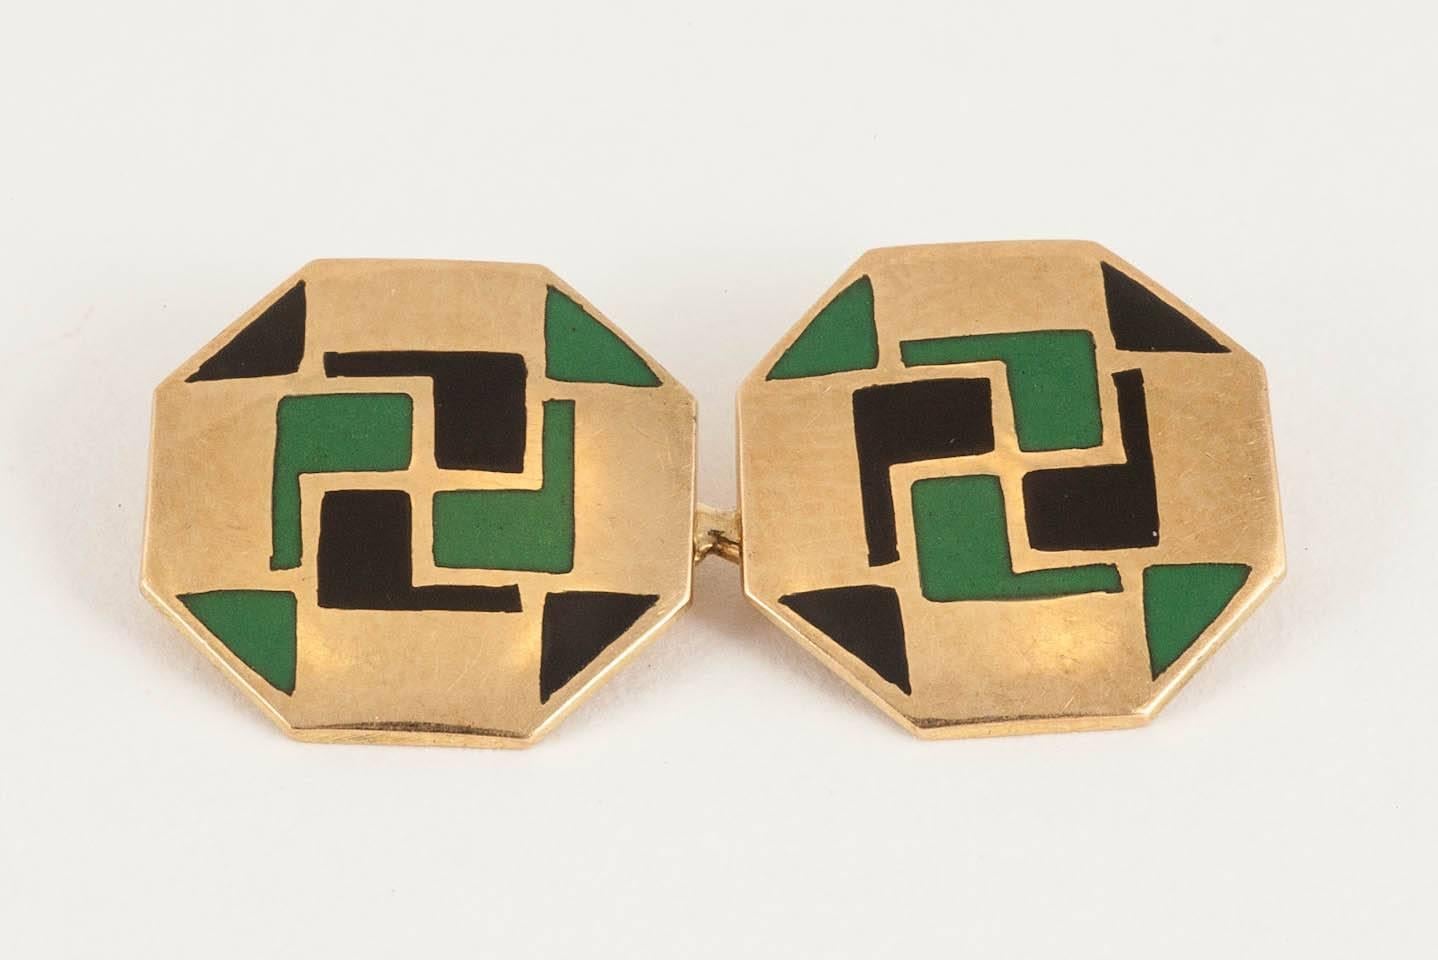 A vintage pair of octagonal 18 karat yellow gold double sided cufflinks from the Art Deco period with green and black enamel decoration. Figure of 8 connection. French marks.
Measures 13mm across.
1930's Vintage piece.
20th century, French circa